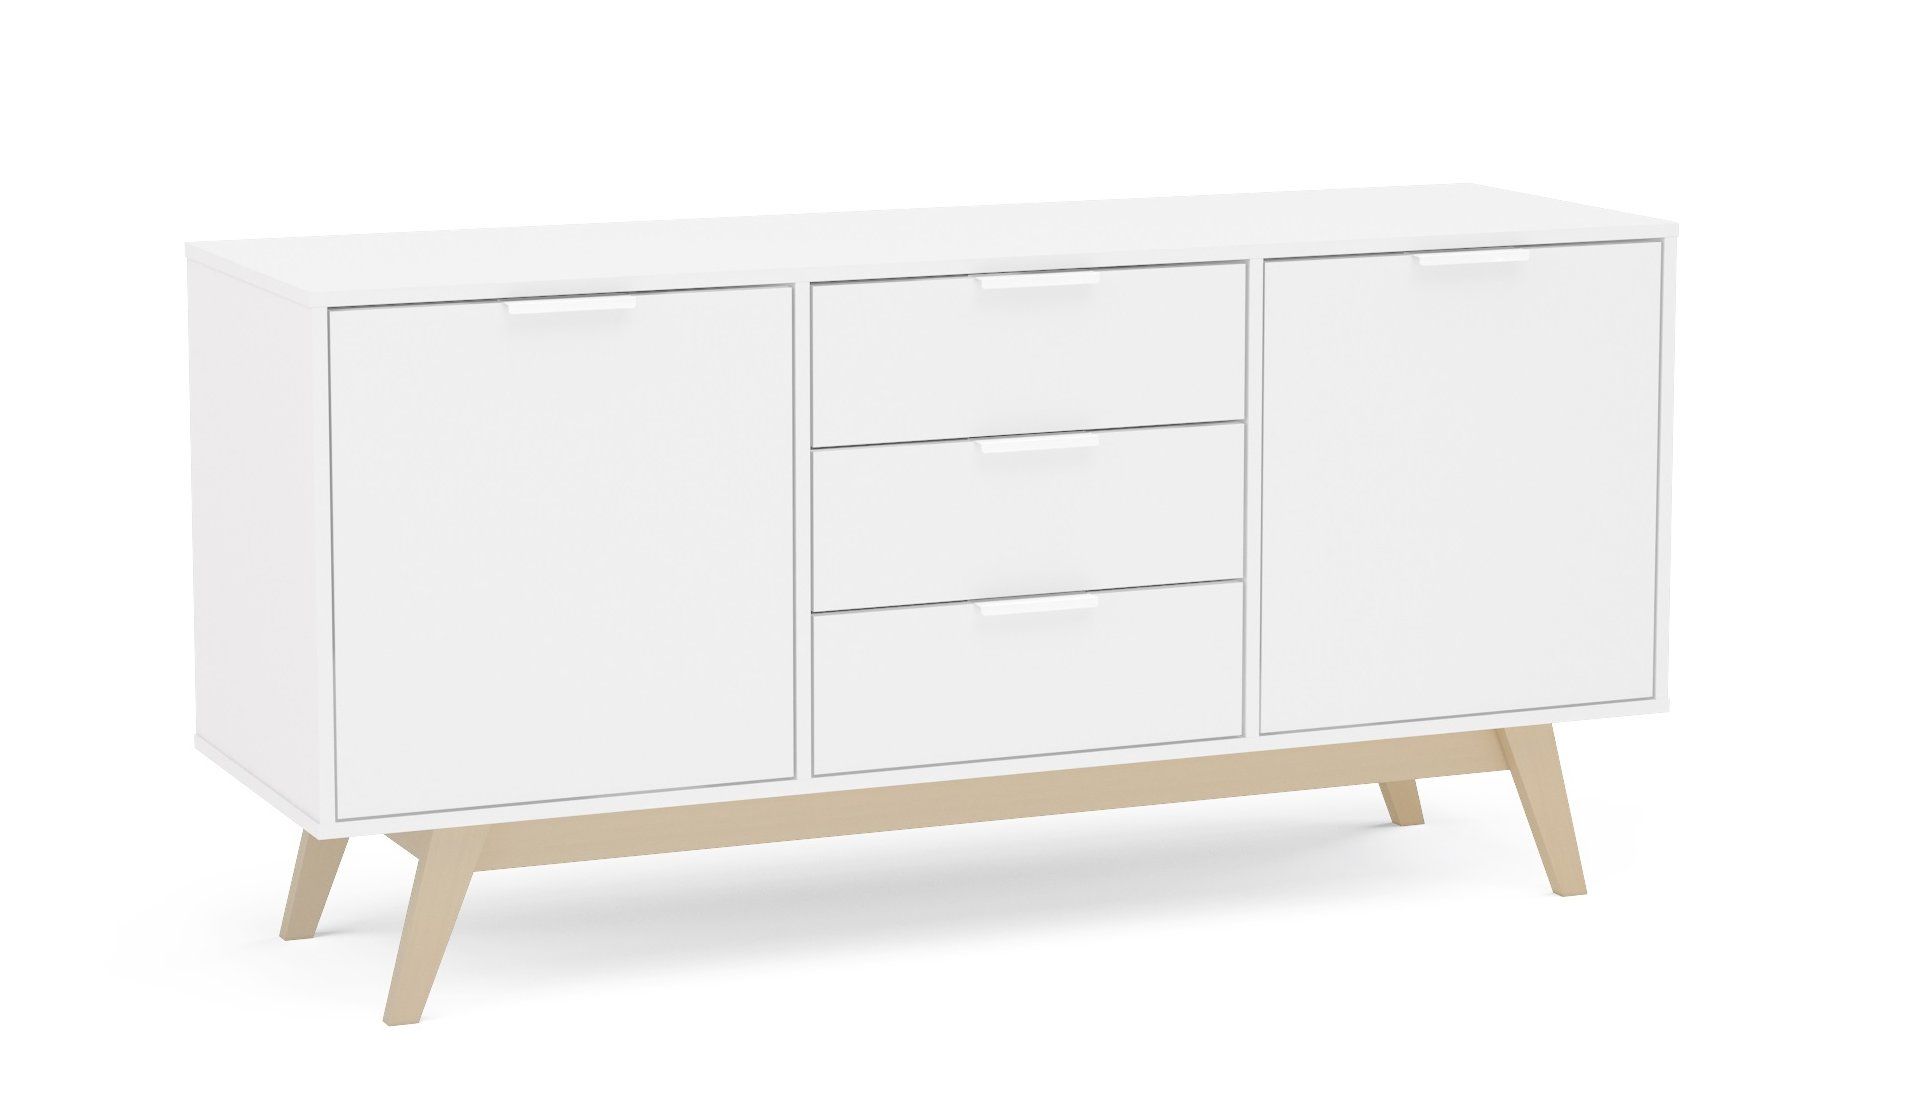 Ebenezer Sideboard & Reviews | Allmodern Intended For Newest Keiko Modern Bookmatch Sideboards (View 20 of 20)